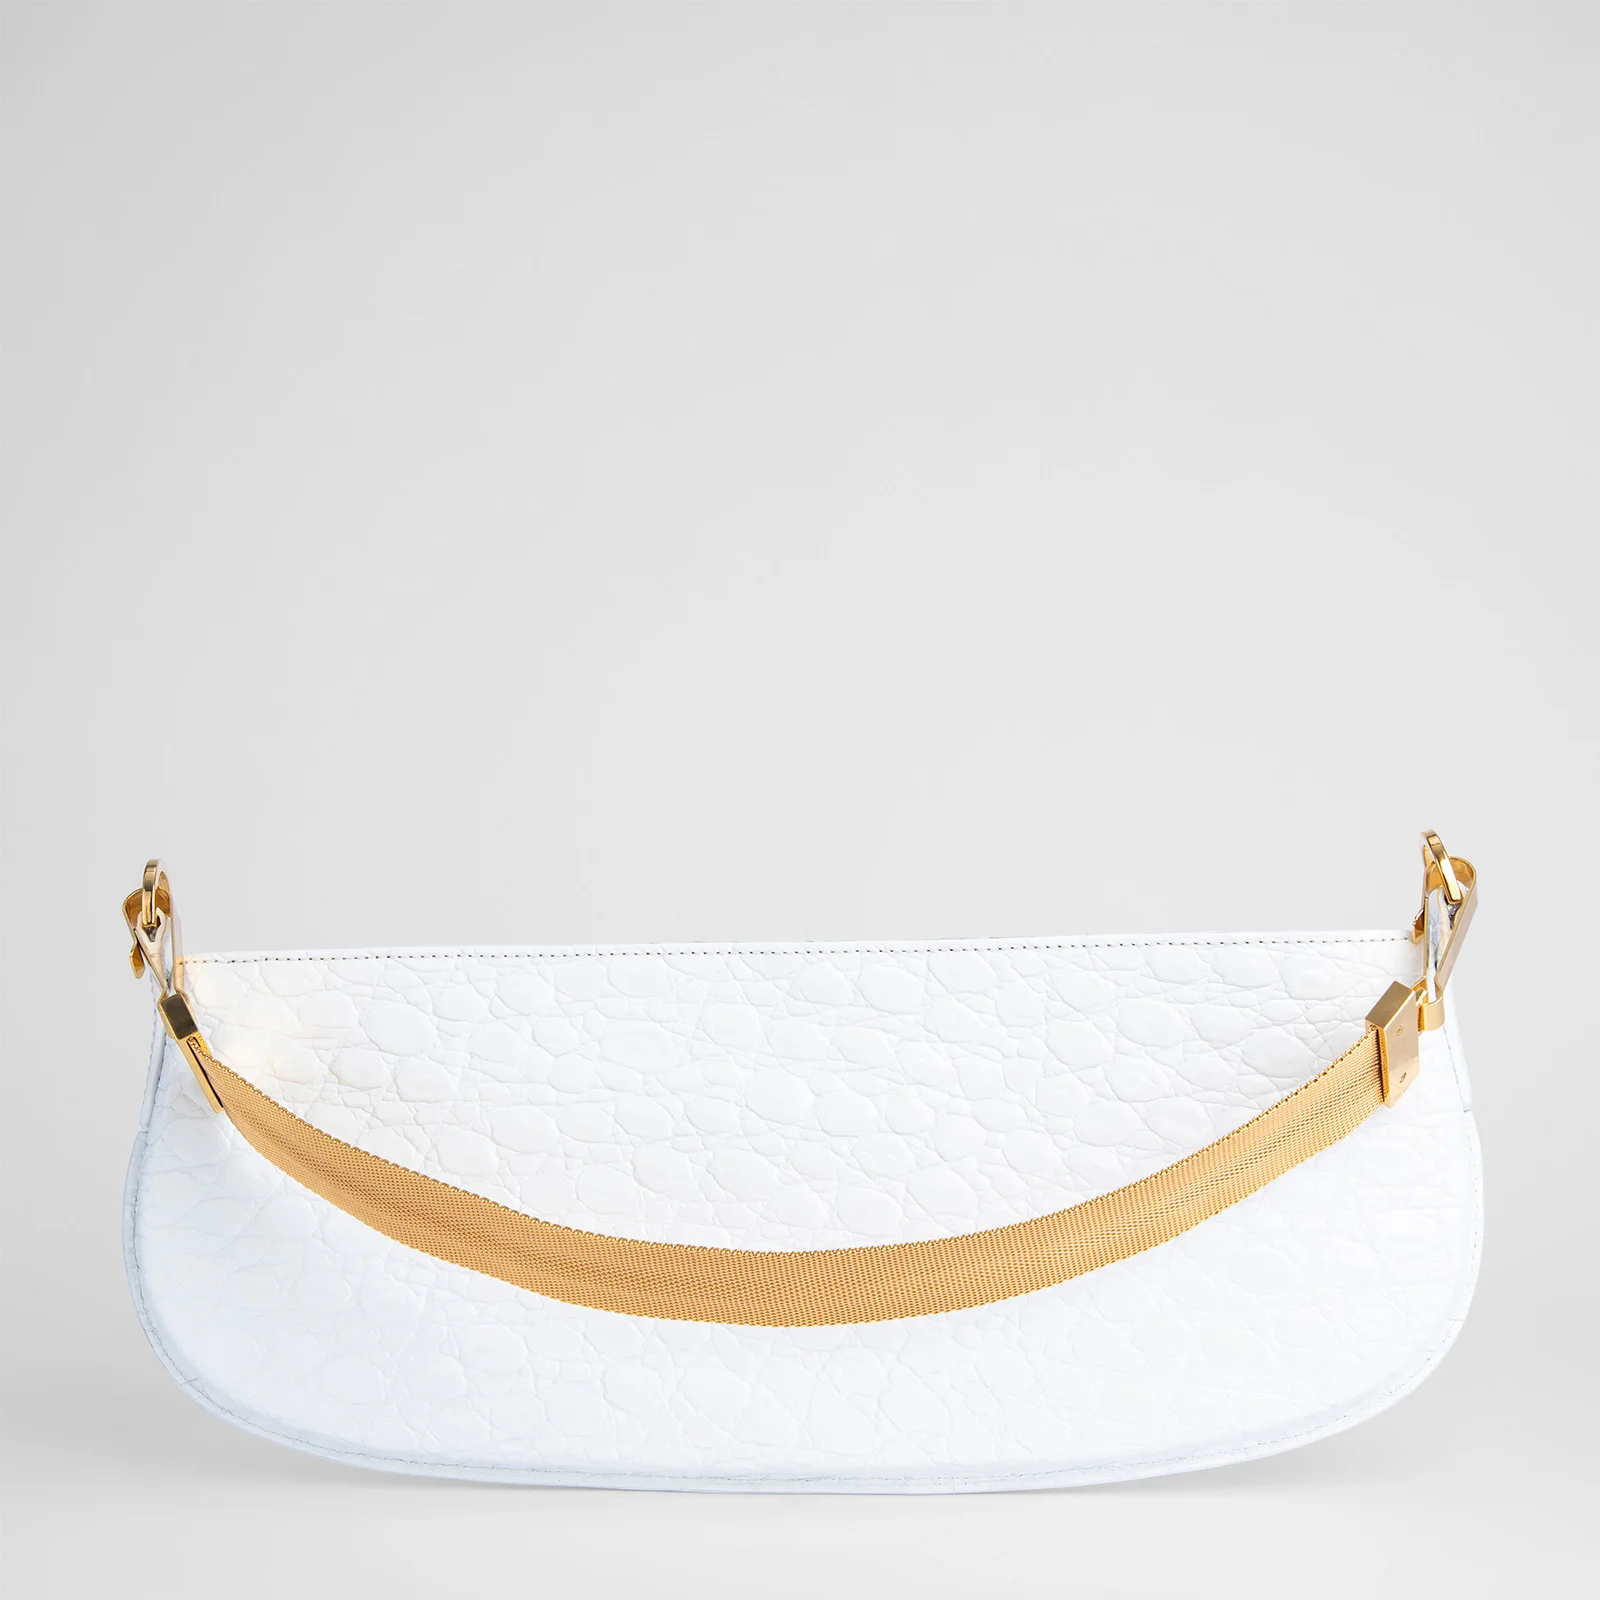 BY FAR Women's Beverly Croco Leather Bag - White Image 1